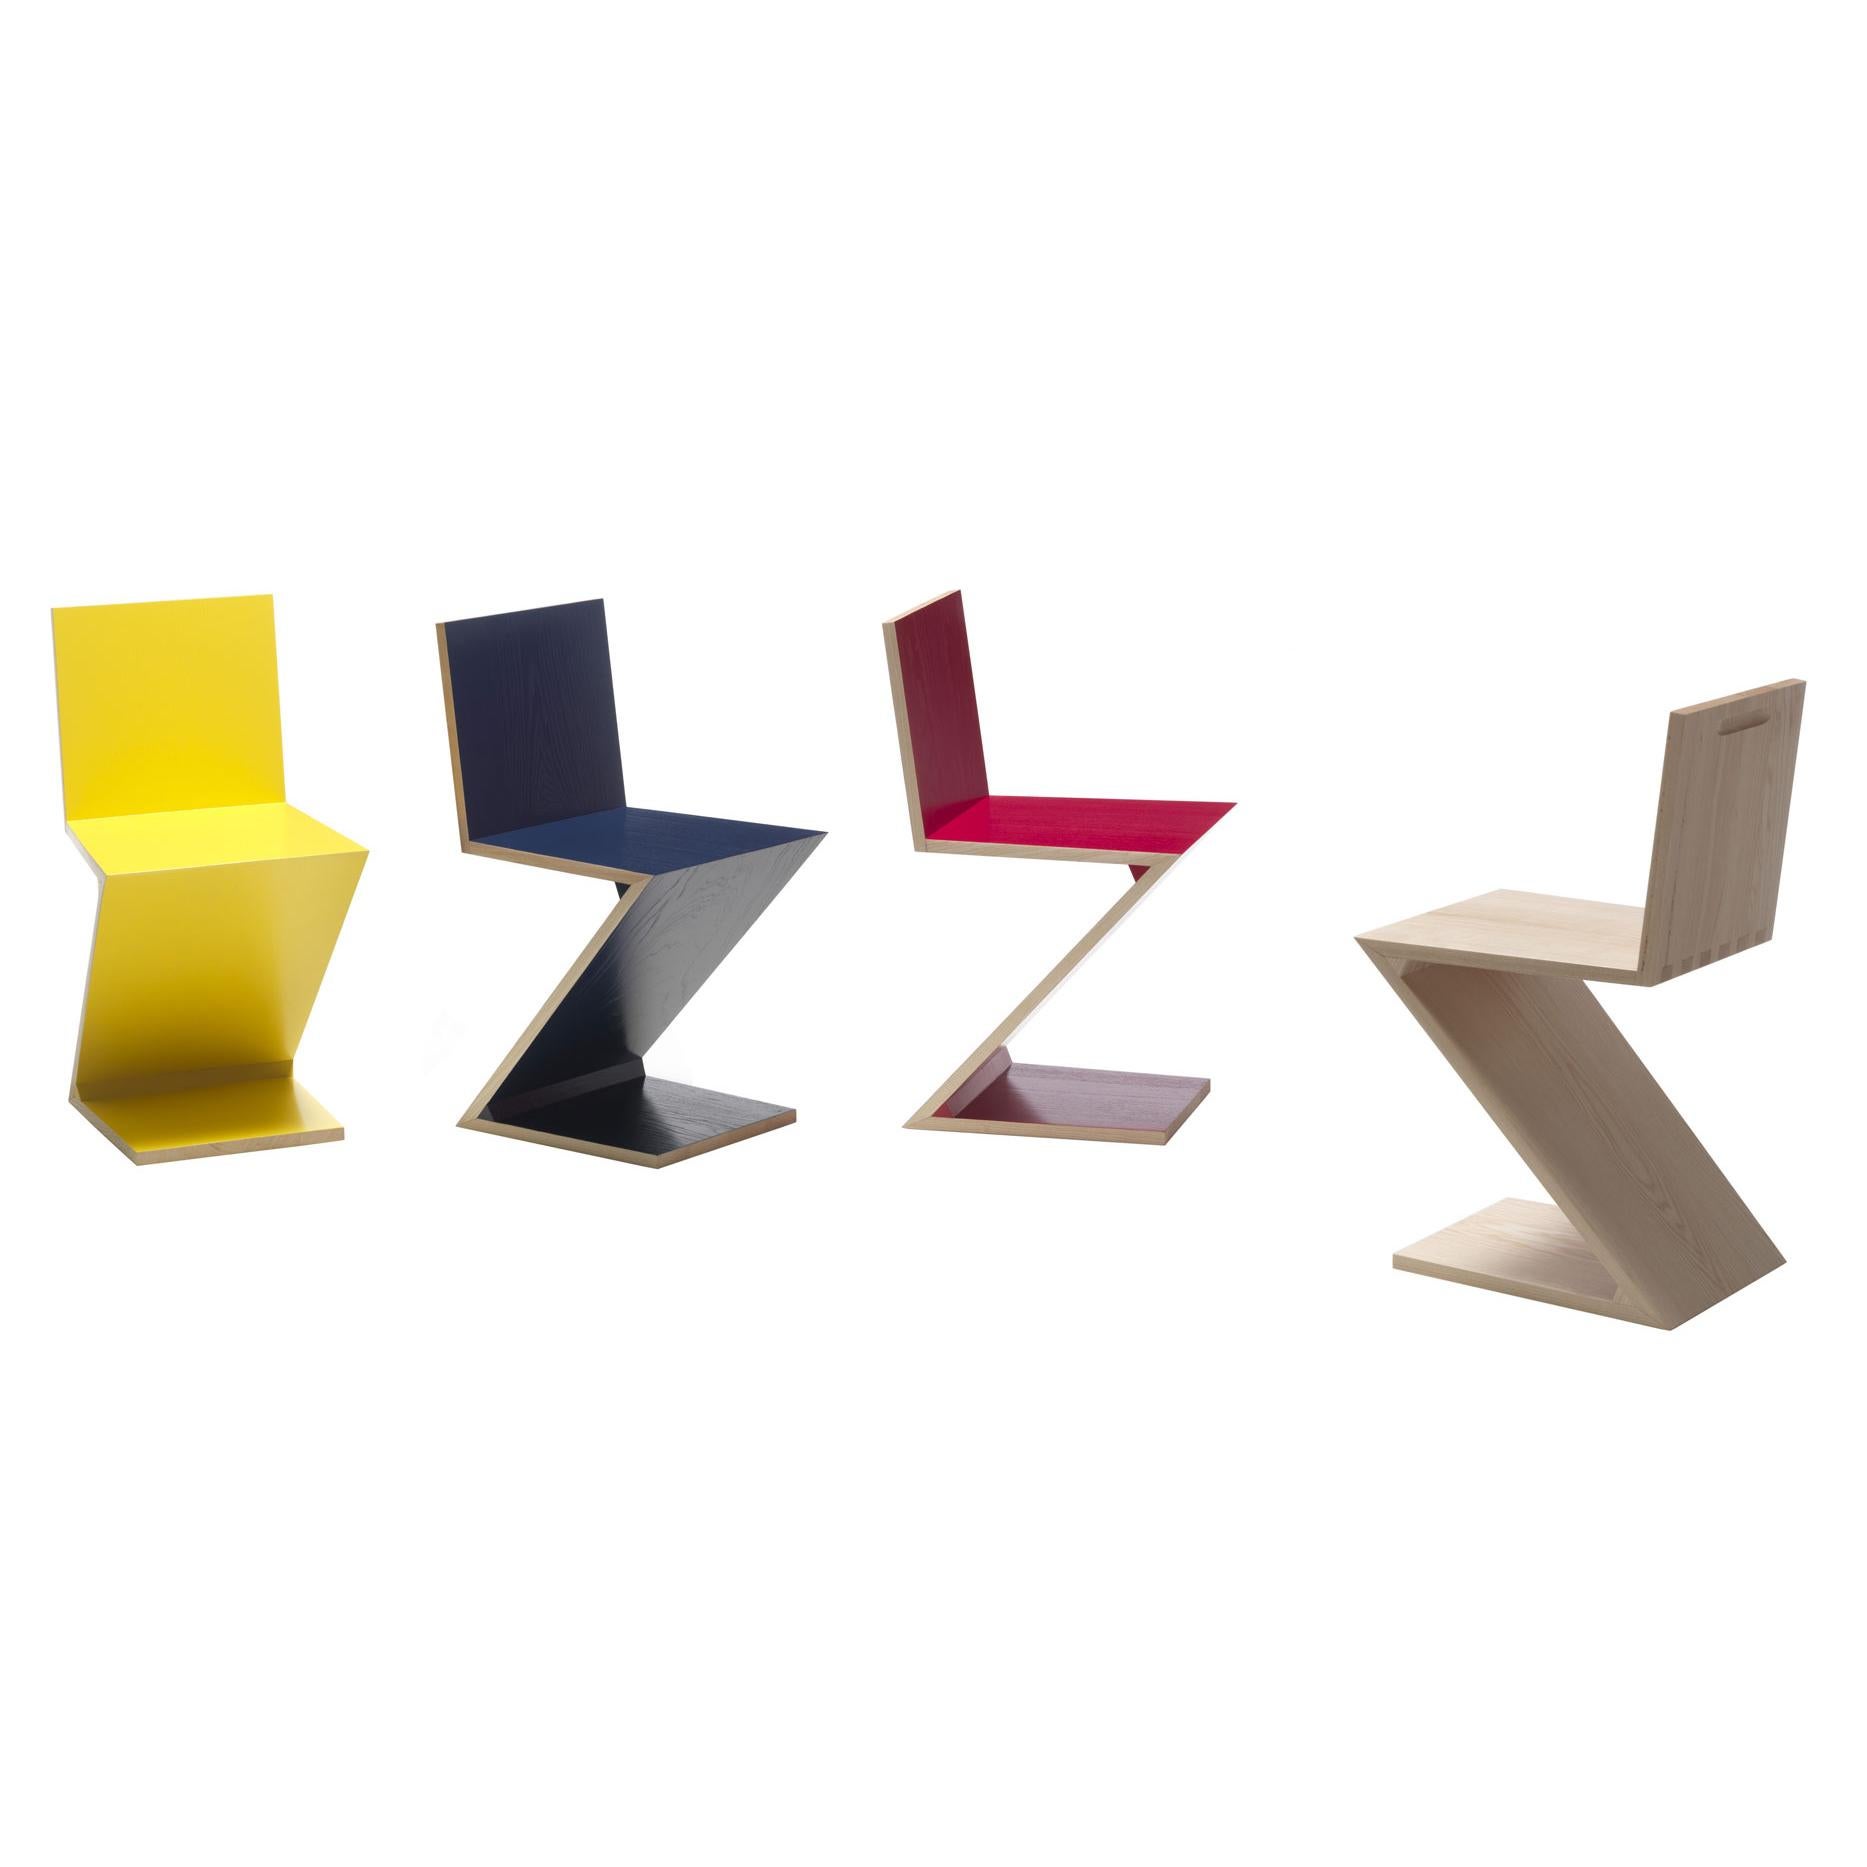 Contemporary Set of Two Zig Zag Chair by Gerrit Thomas Rietveld for Cassina For Sale